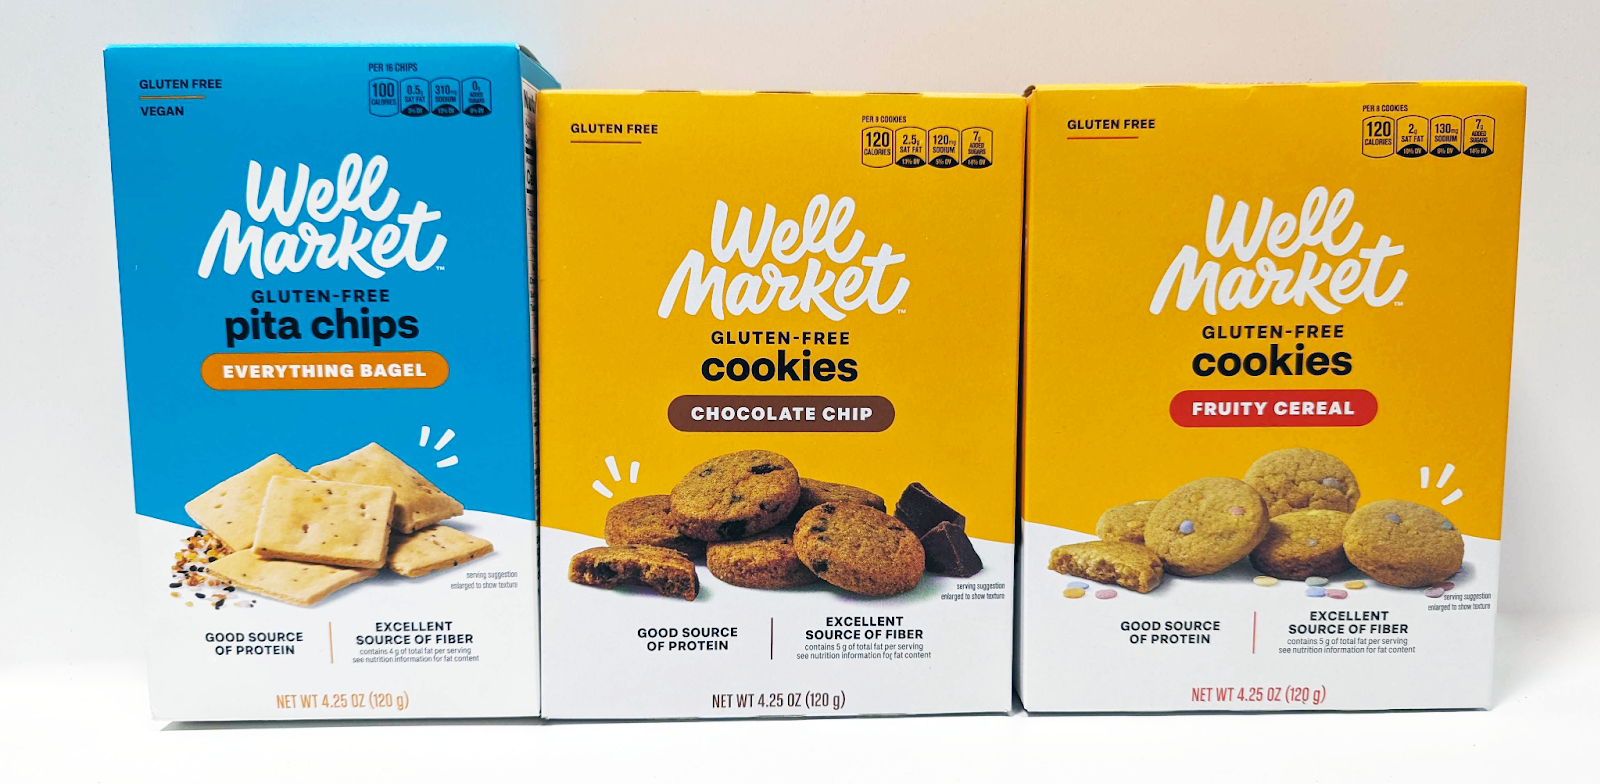 antithesis products, two boxes of cookies and one box of crackers